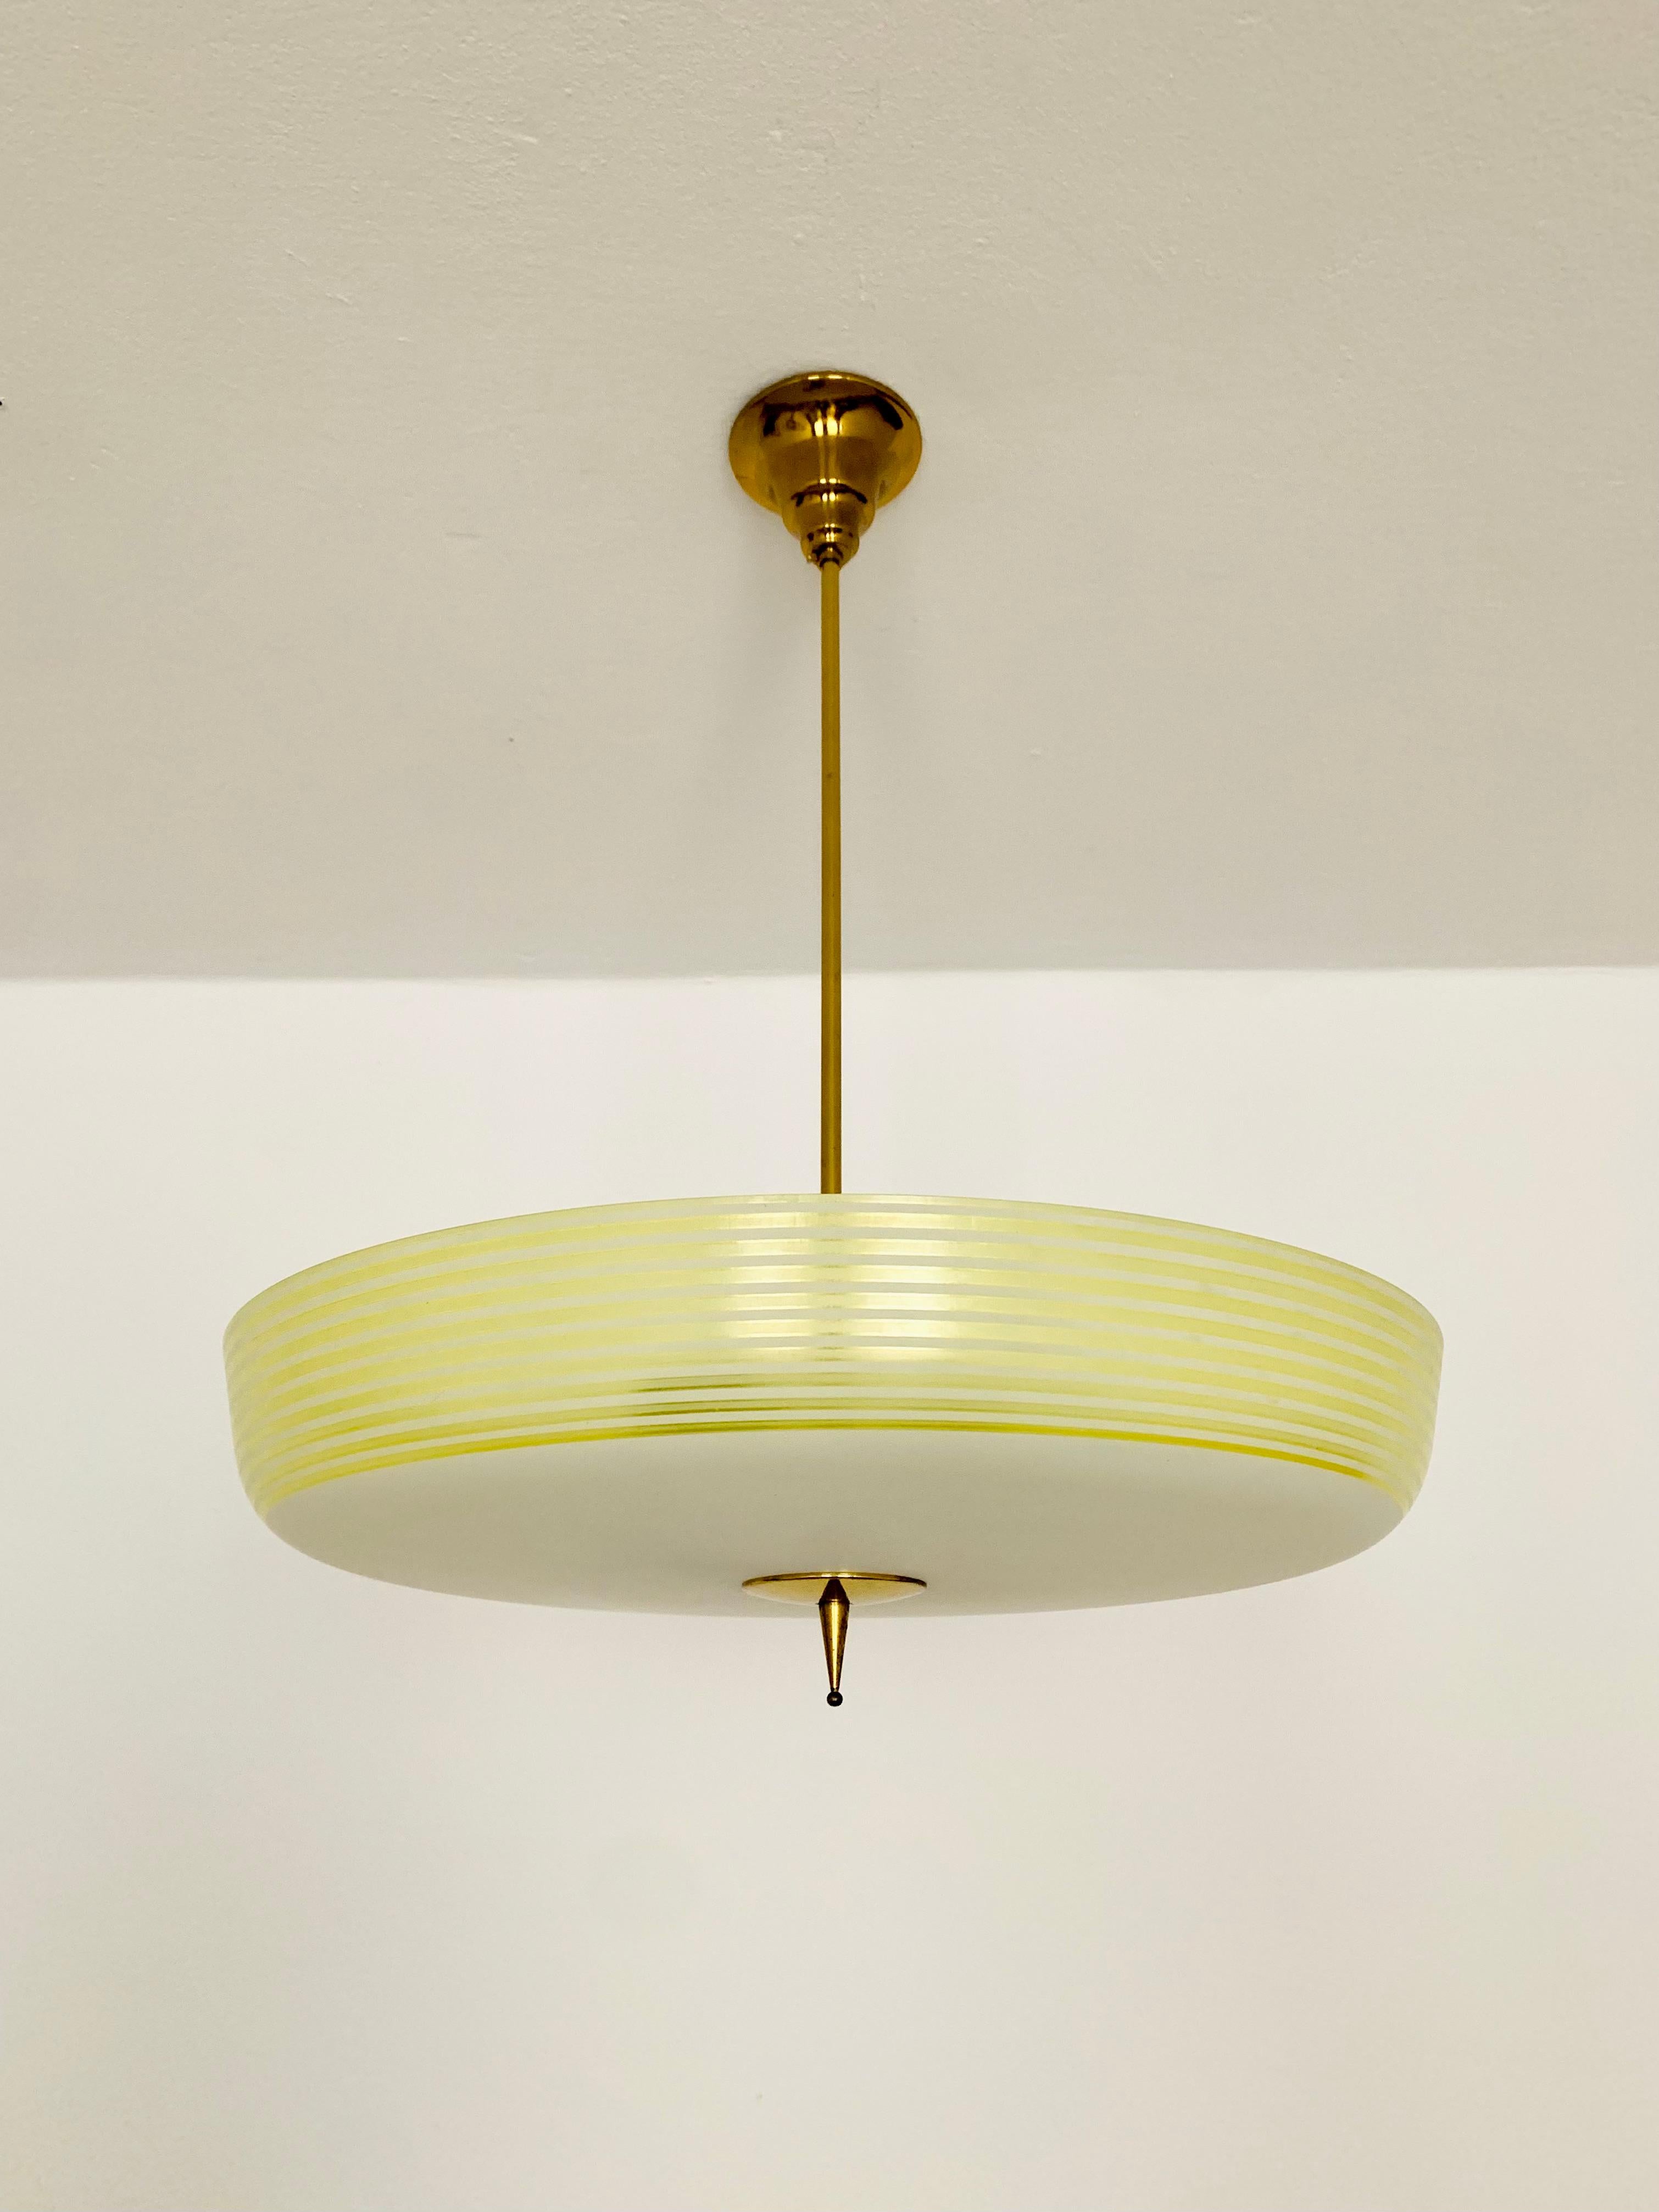 Wonderful ceiling lamp from the 1950s.
The glass has a special shape and is designed in multiple colors.
The design and the materials used create a comfortable light.
A stunning lamp and a real asset to any home.

Manufacturer: